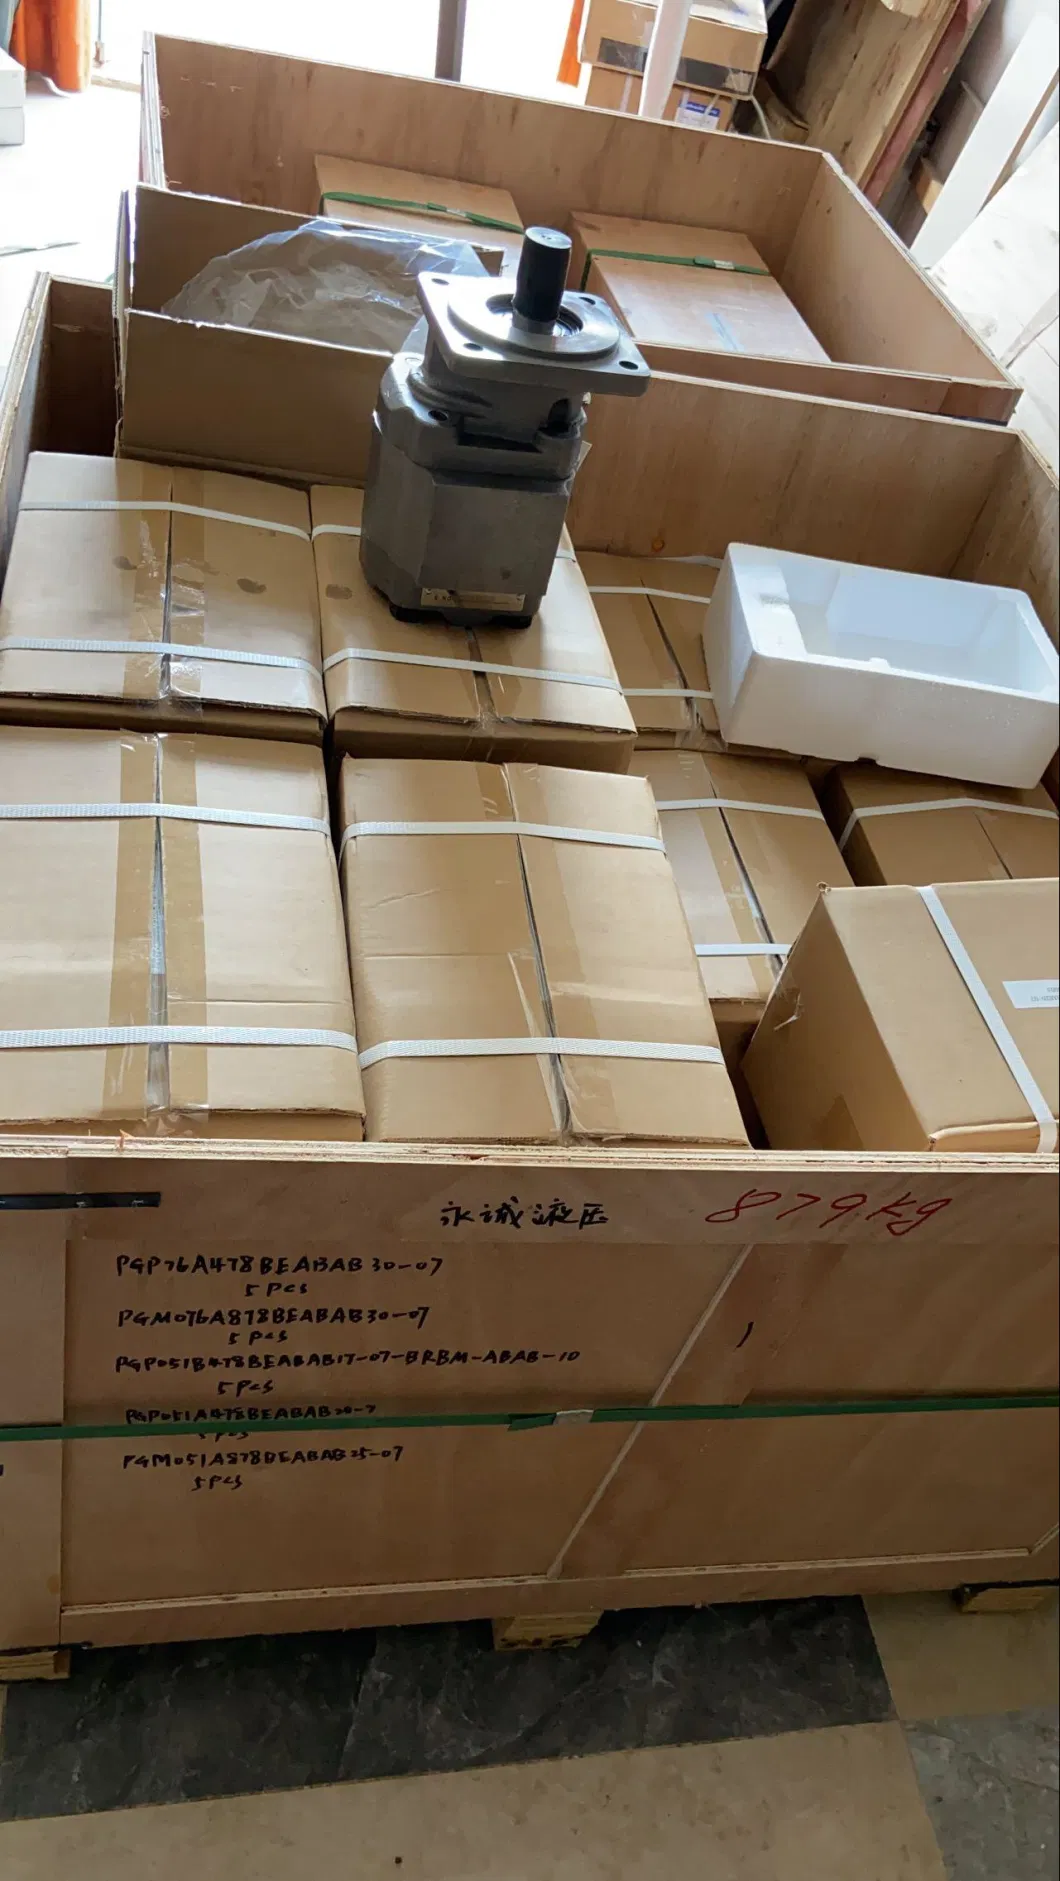 Hydraulic Gear Pump G101/G102/C101/C102/P30/P31/P50/P51/P75/P76/P315/P330/P350/P365/P620 for Crawler Excavator, Agricultural Machinery Spare Parts